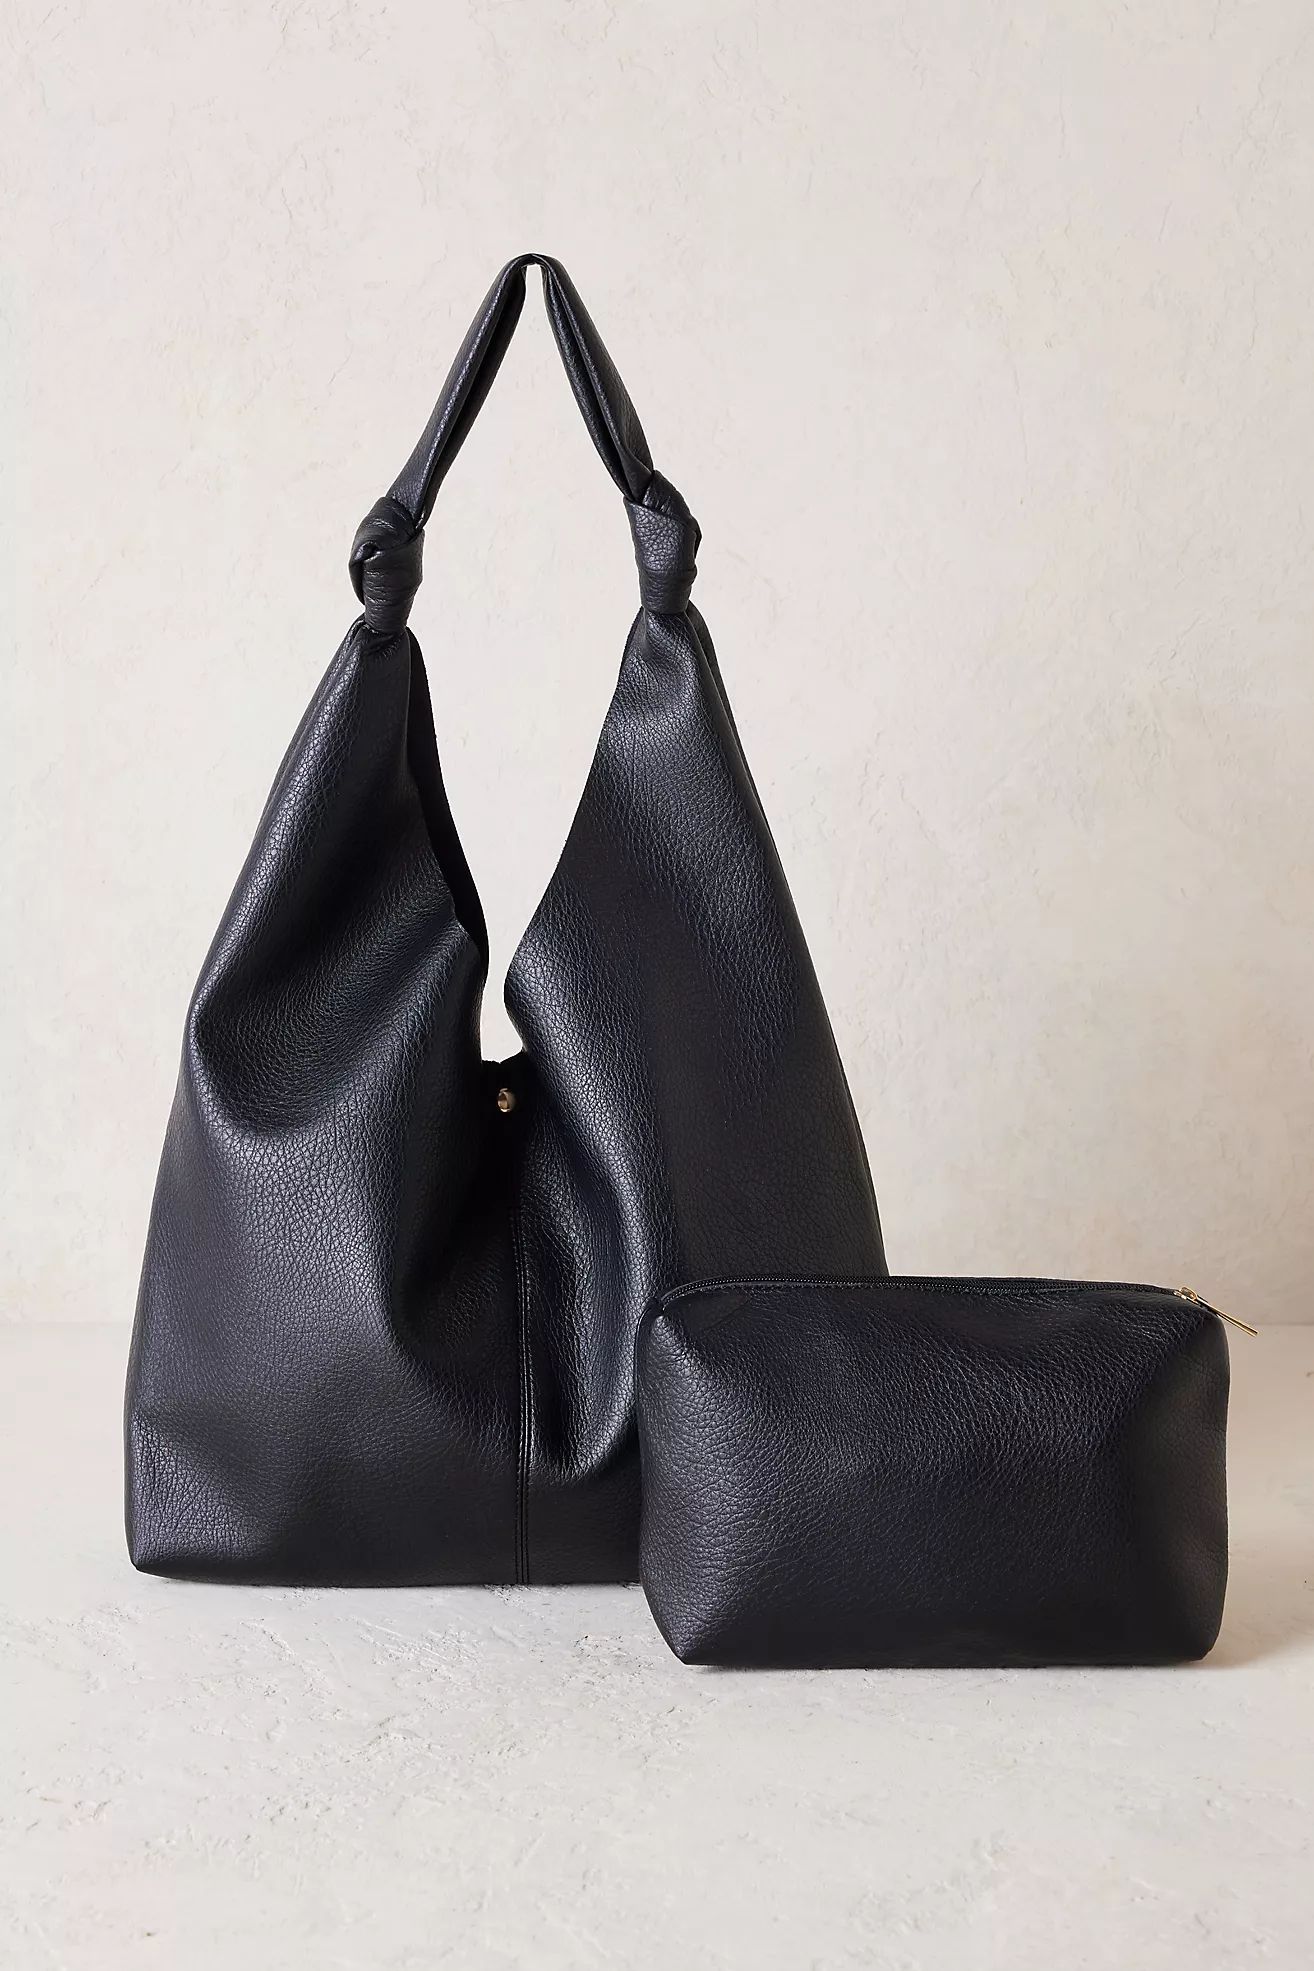 Knotted Slouchy Faux Leather Bag | Anthropologie (UK)